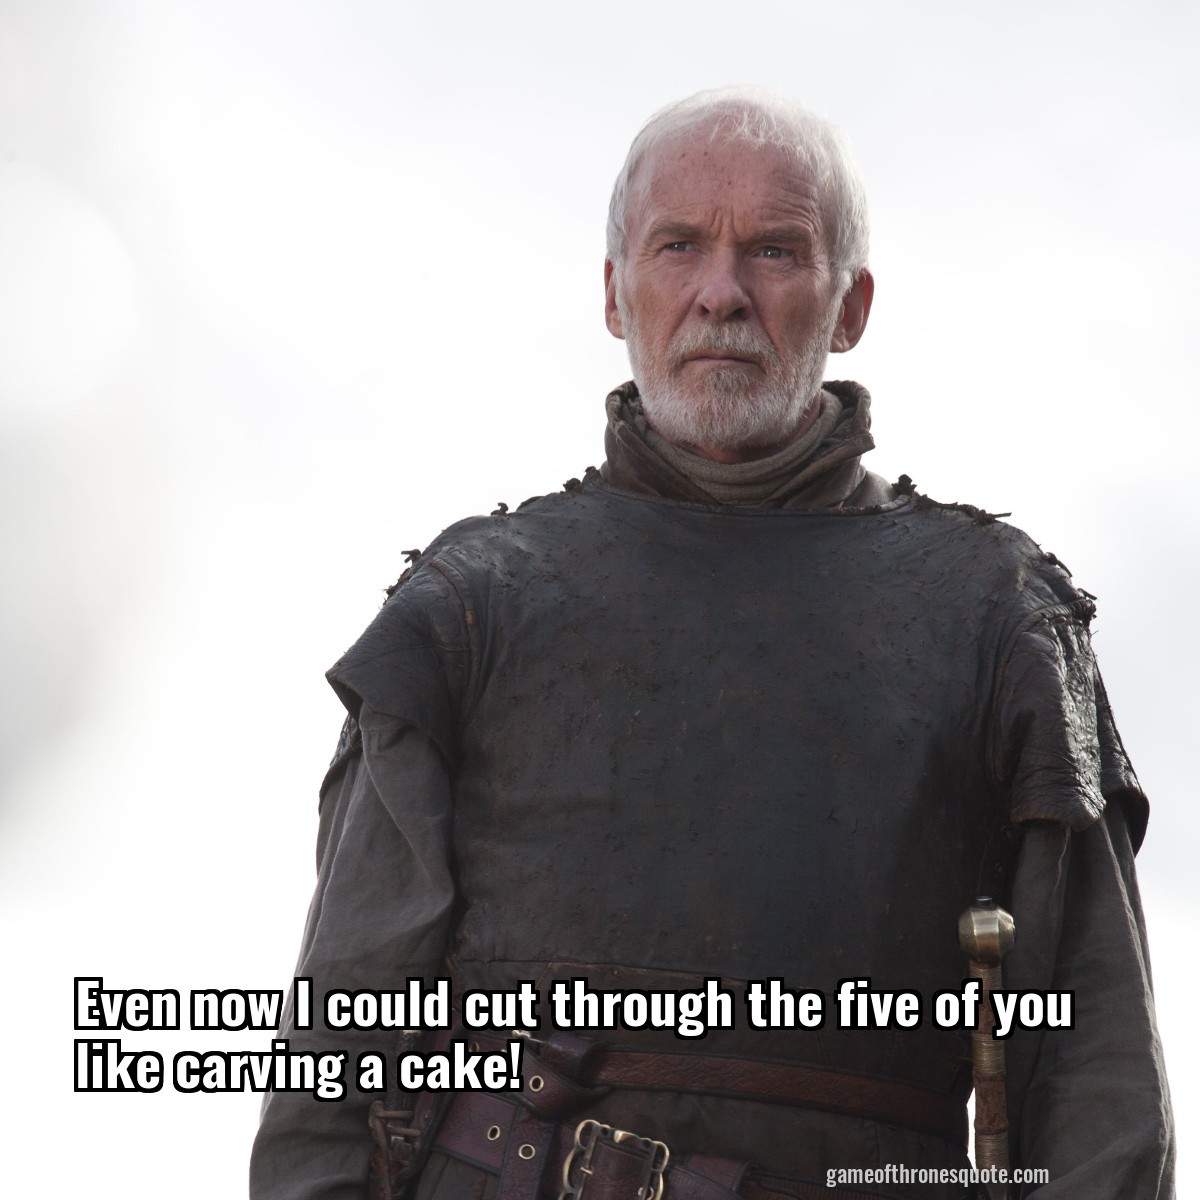 Even now I could cut through the five of you like carving a cake!